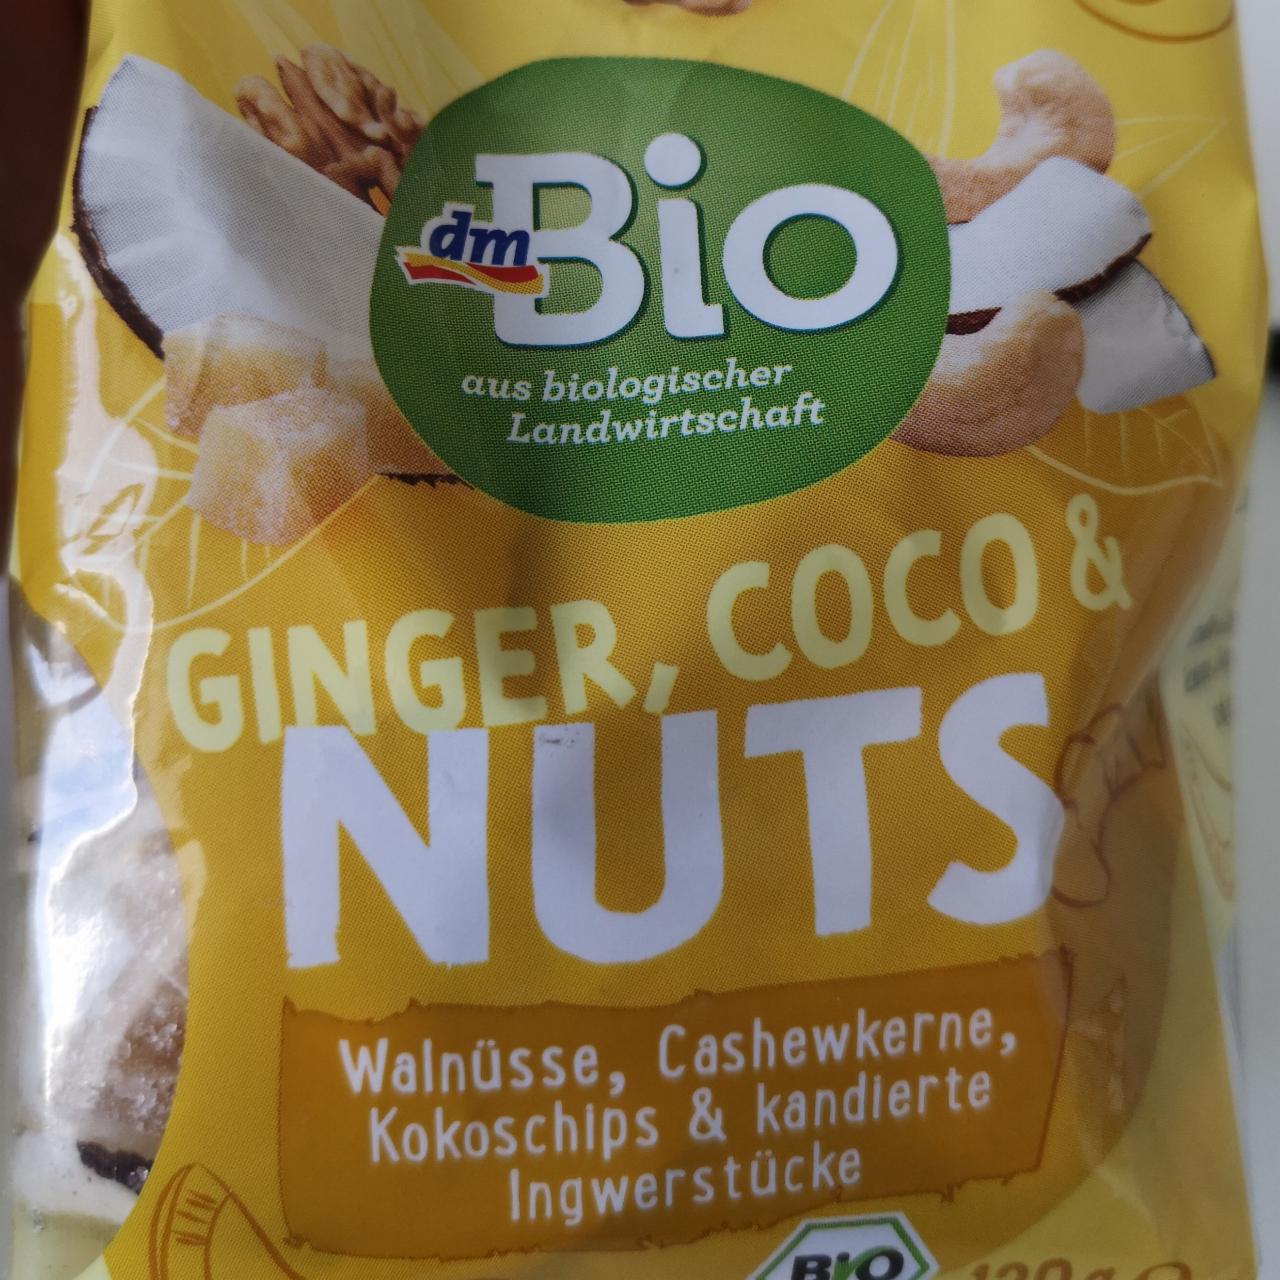 Fotografie - Ginger, Coco & Nuts dmBio